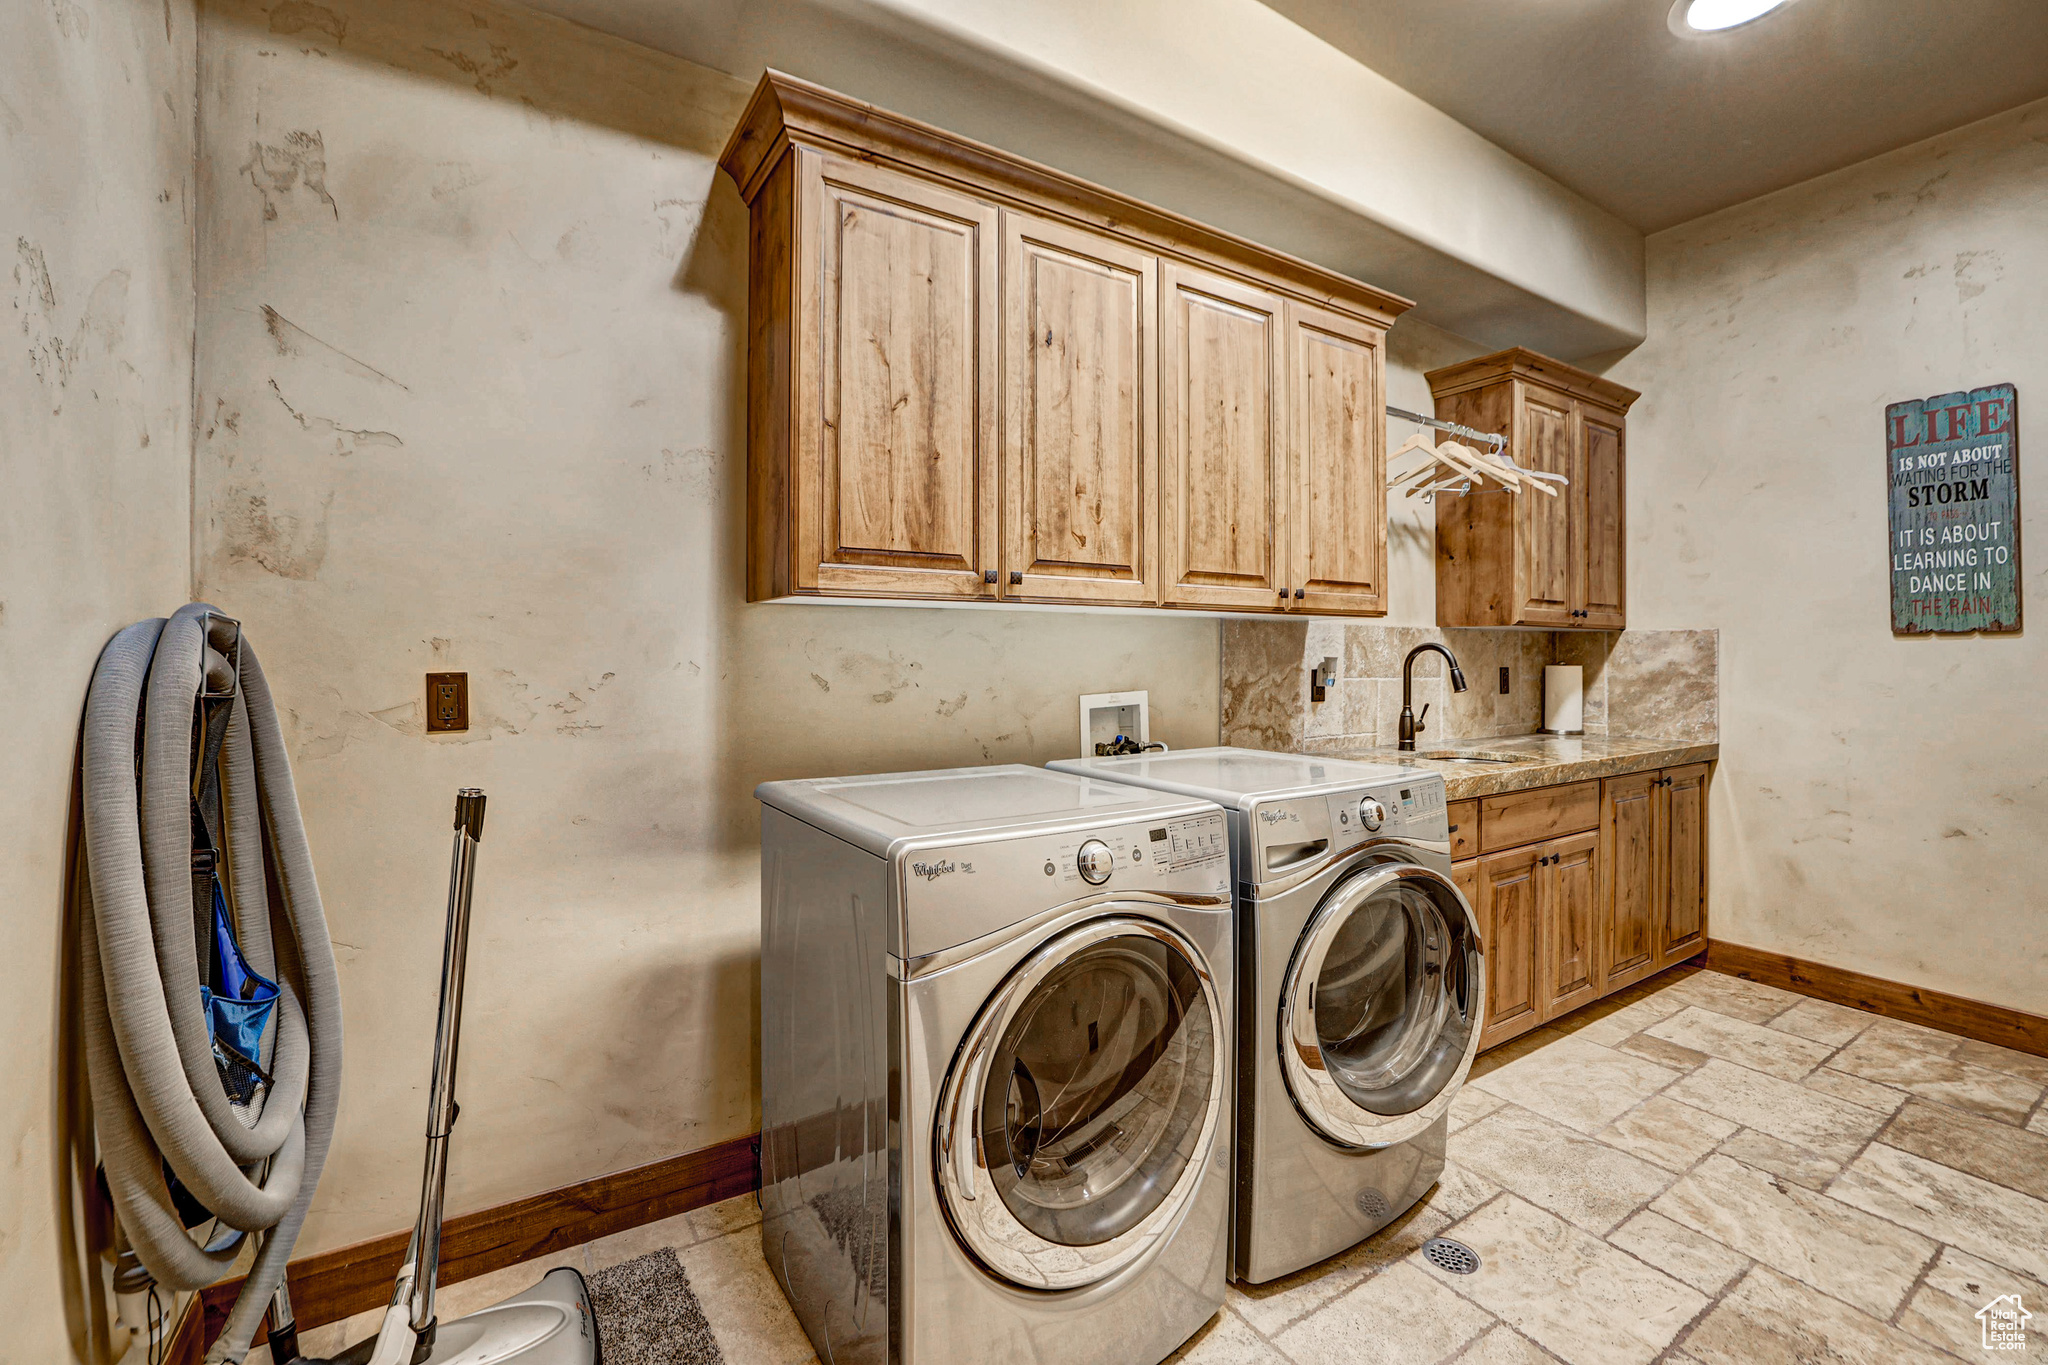 Clothes washing area featuring cabinets, sink, light tile floors, and washing machine and clothes dryer